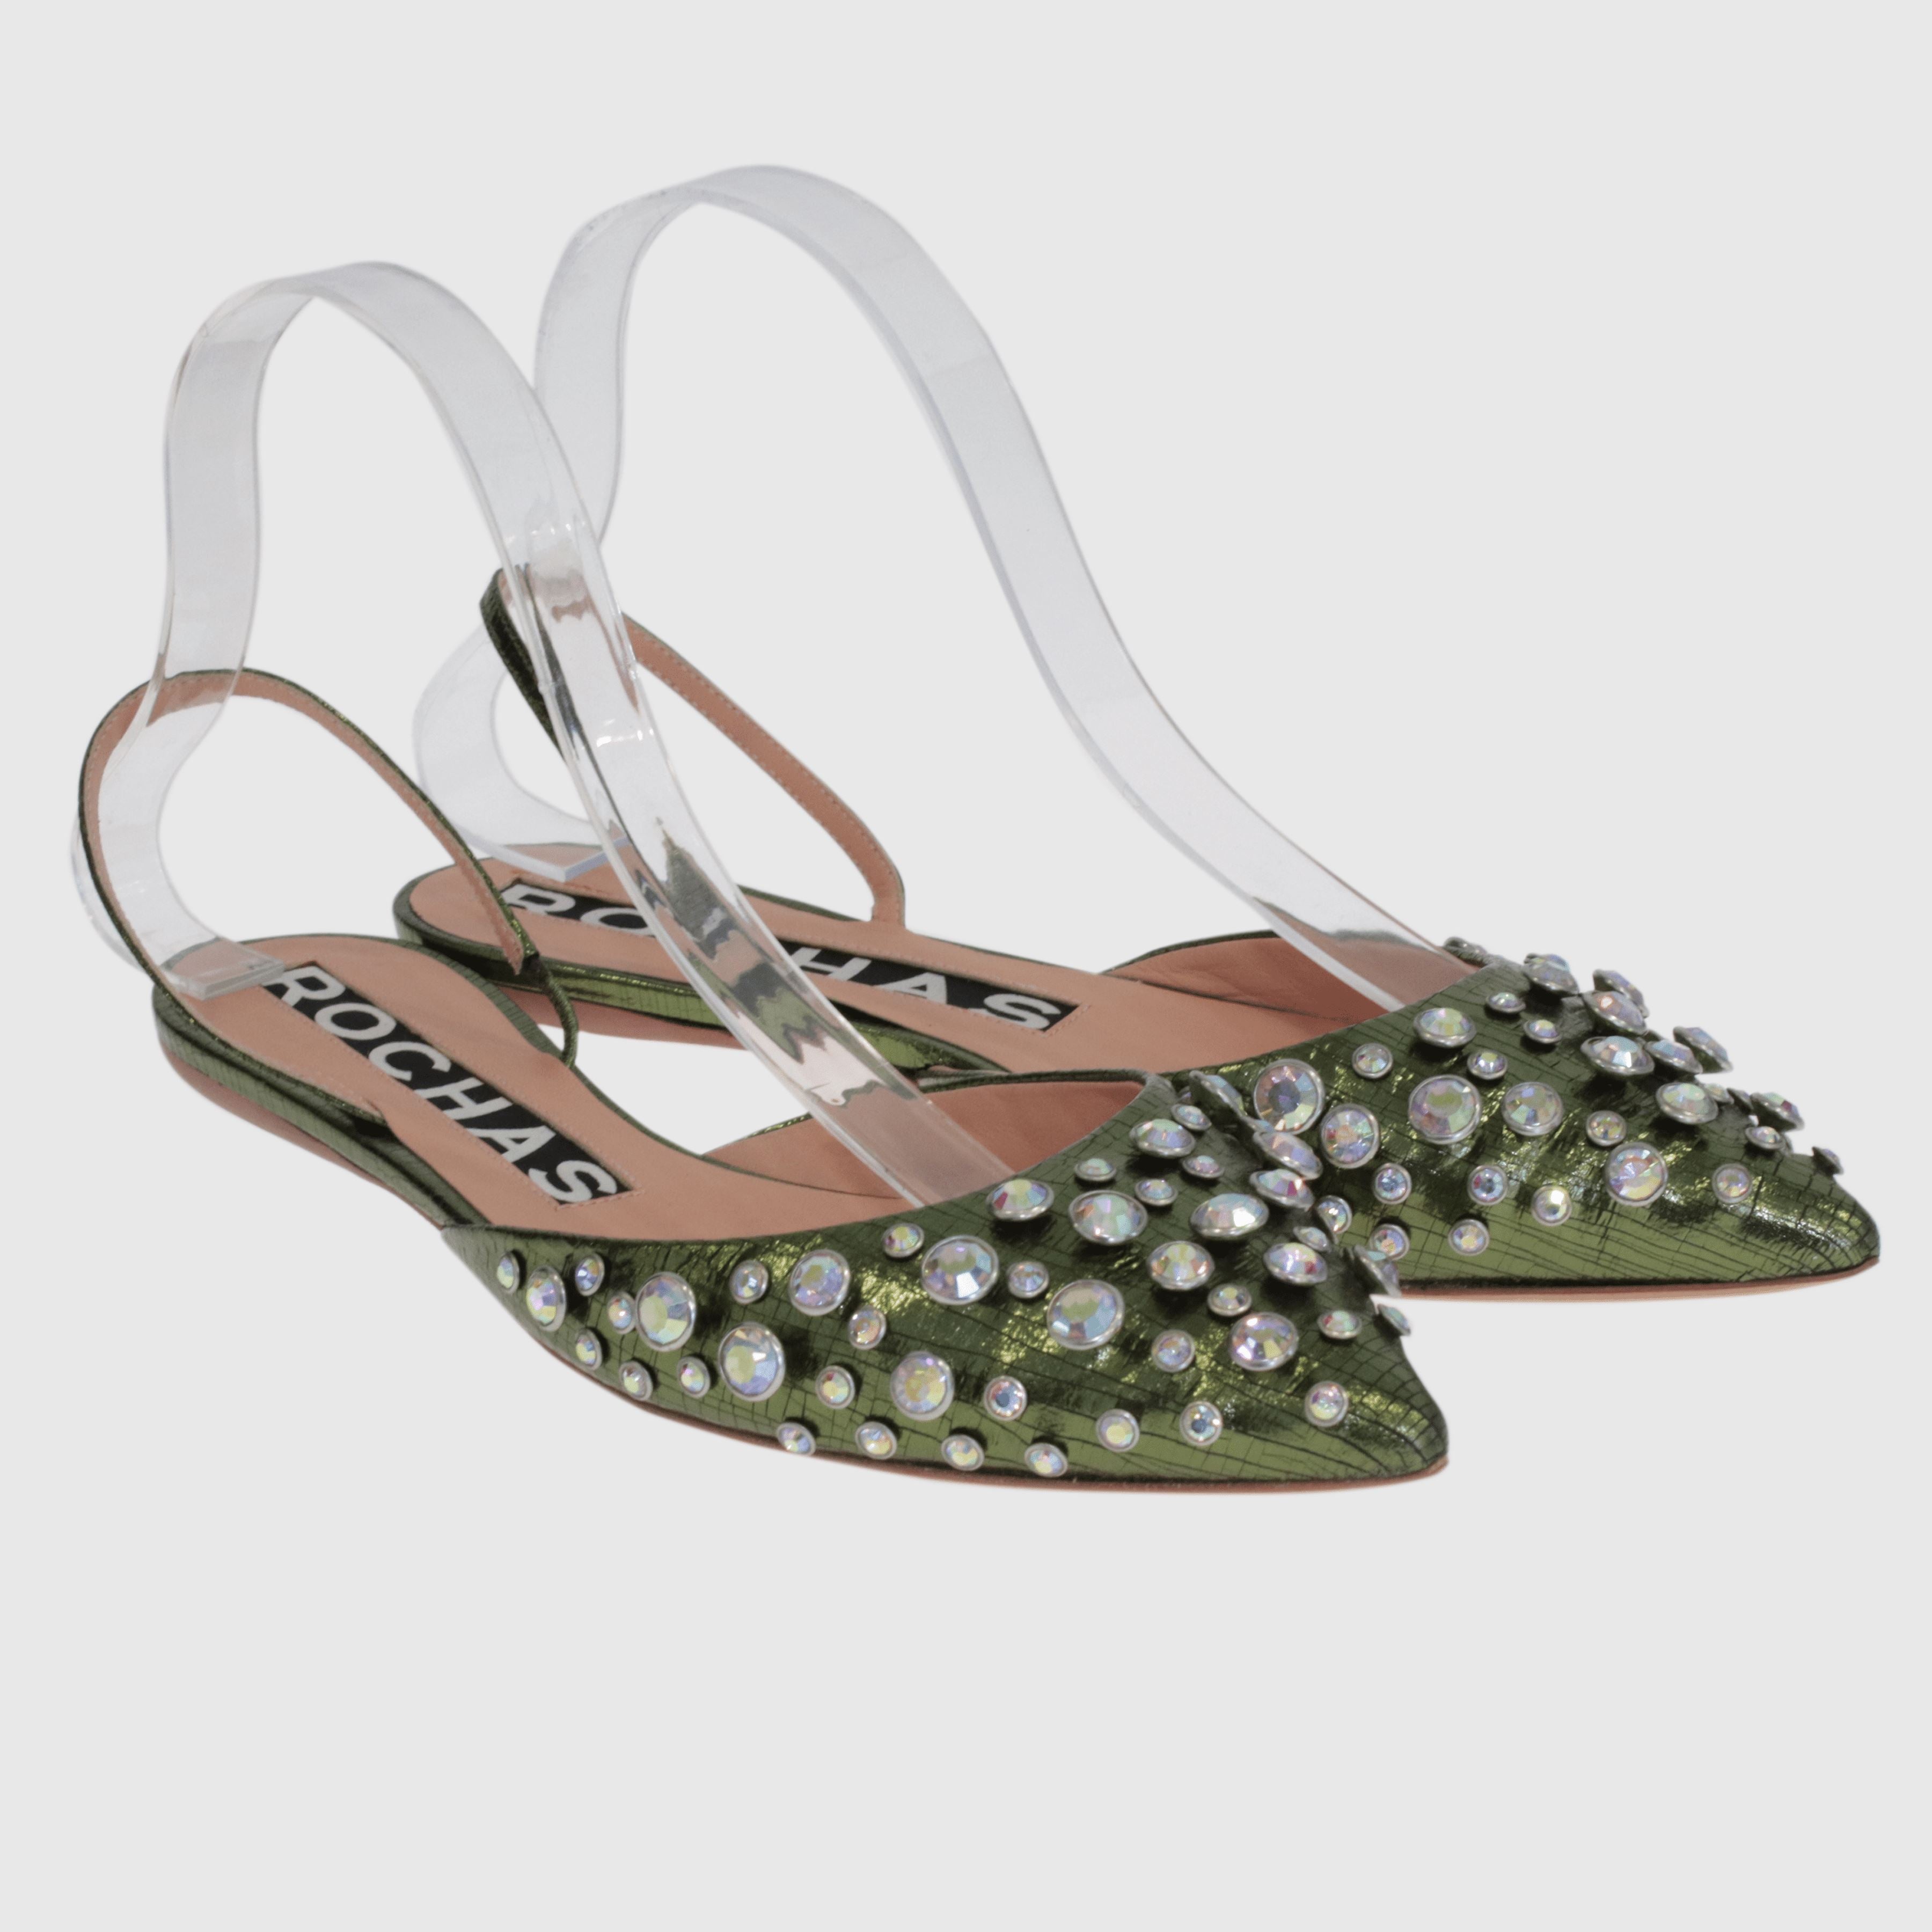 Metallic Green Crystal Embellished Pointed Slingback Flat Sandals Shoes Rochas 